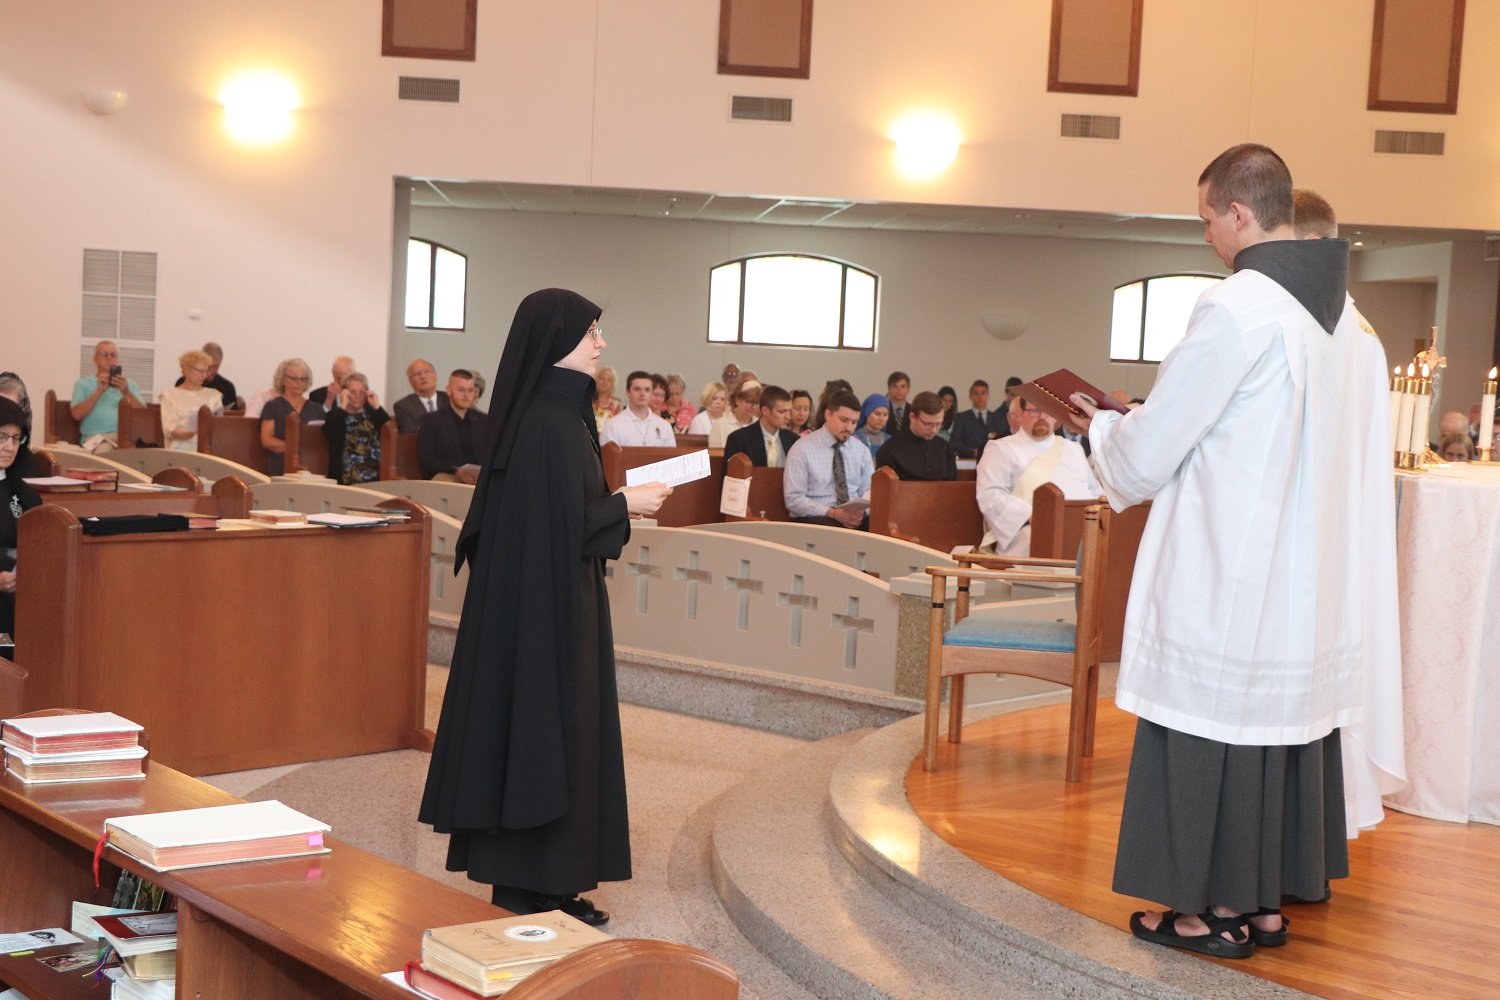  The rite of calling: before the homily, Fr. Tony Hollowell (the main celebrant), in the name of the Church, formally calls Sr. Frances Marie to express her intention to make perpetual vows 